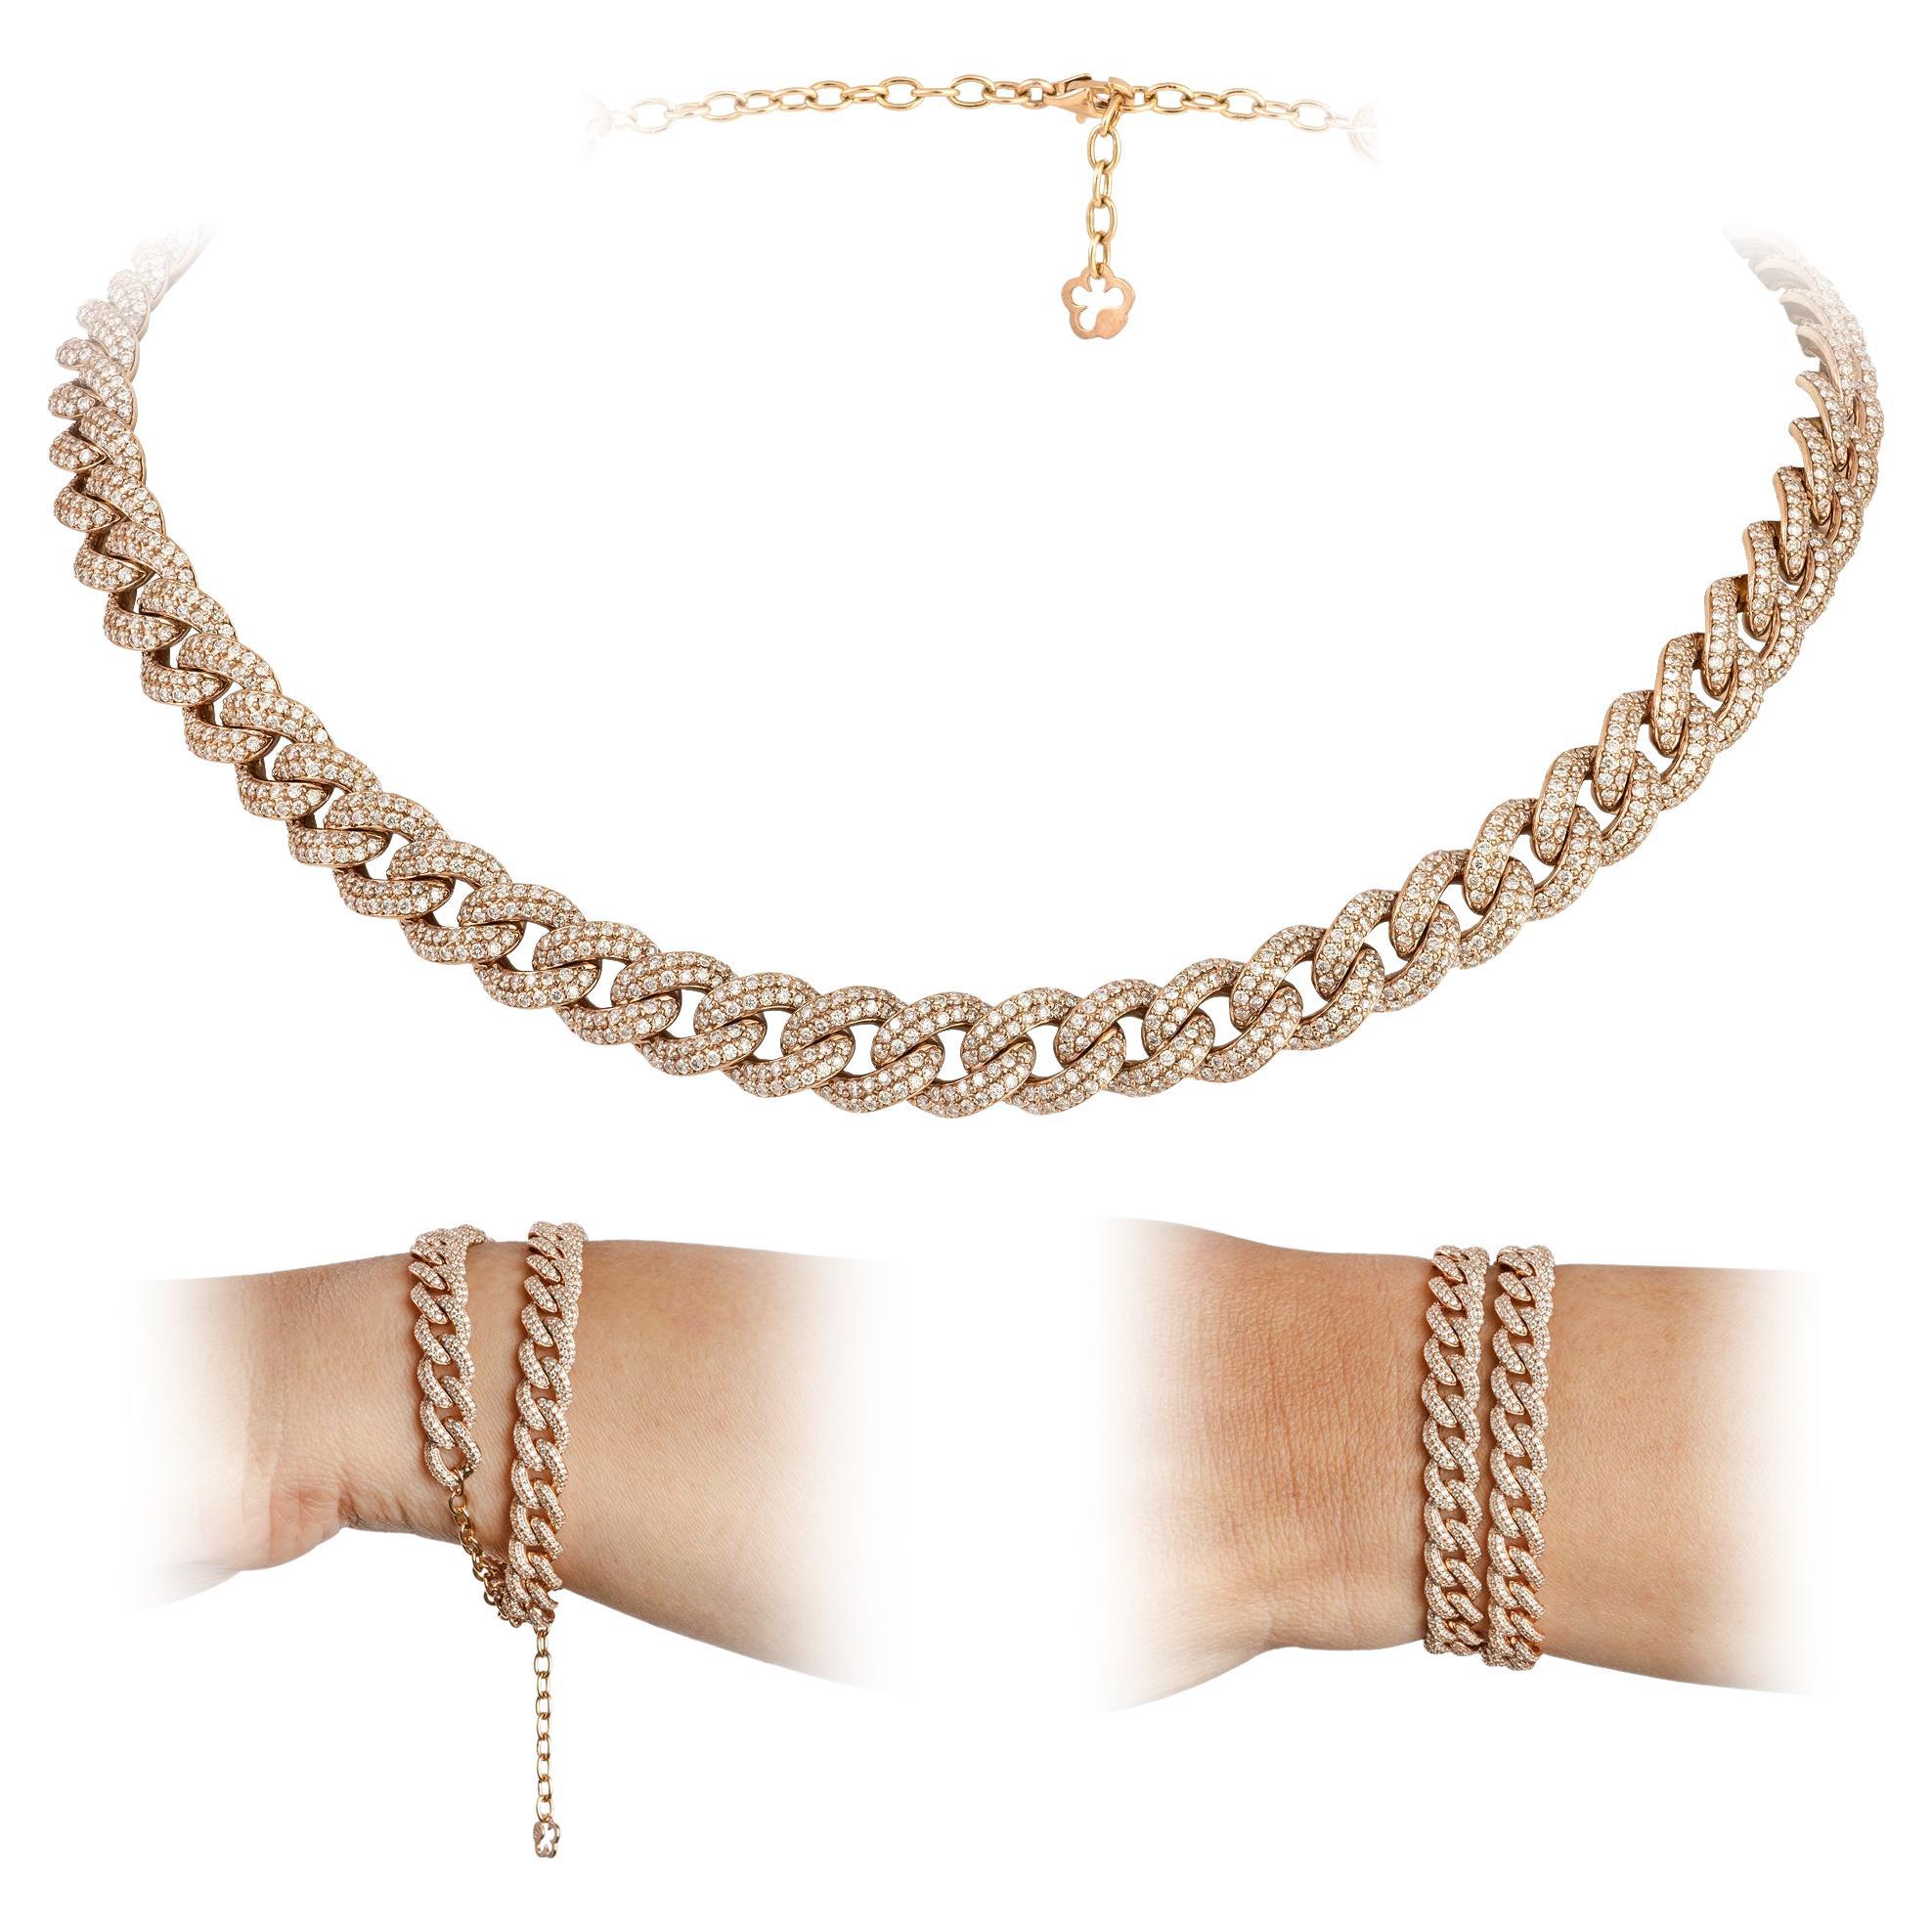 Every Day Pink Gold 18K Necklace Diamond for Her